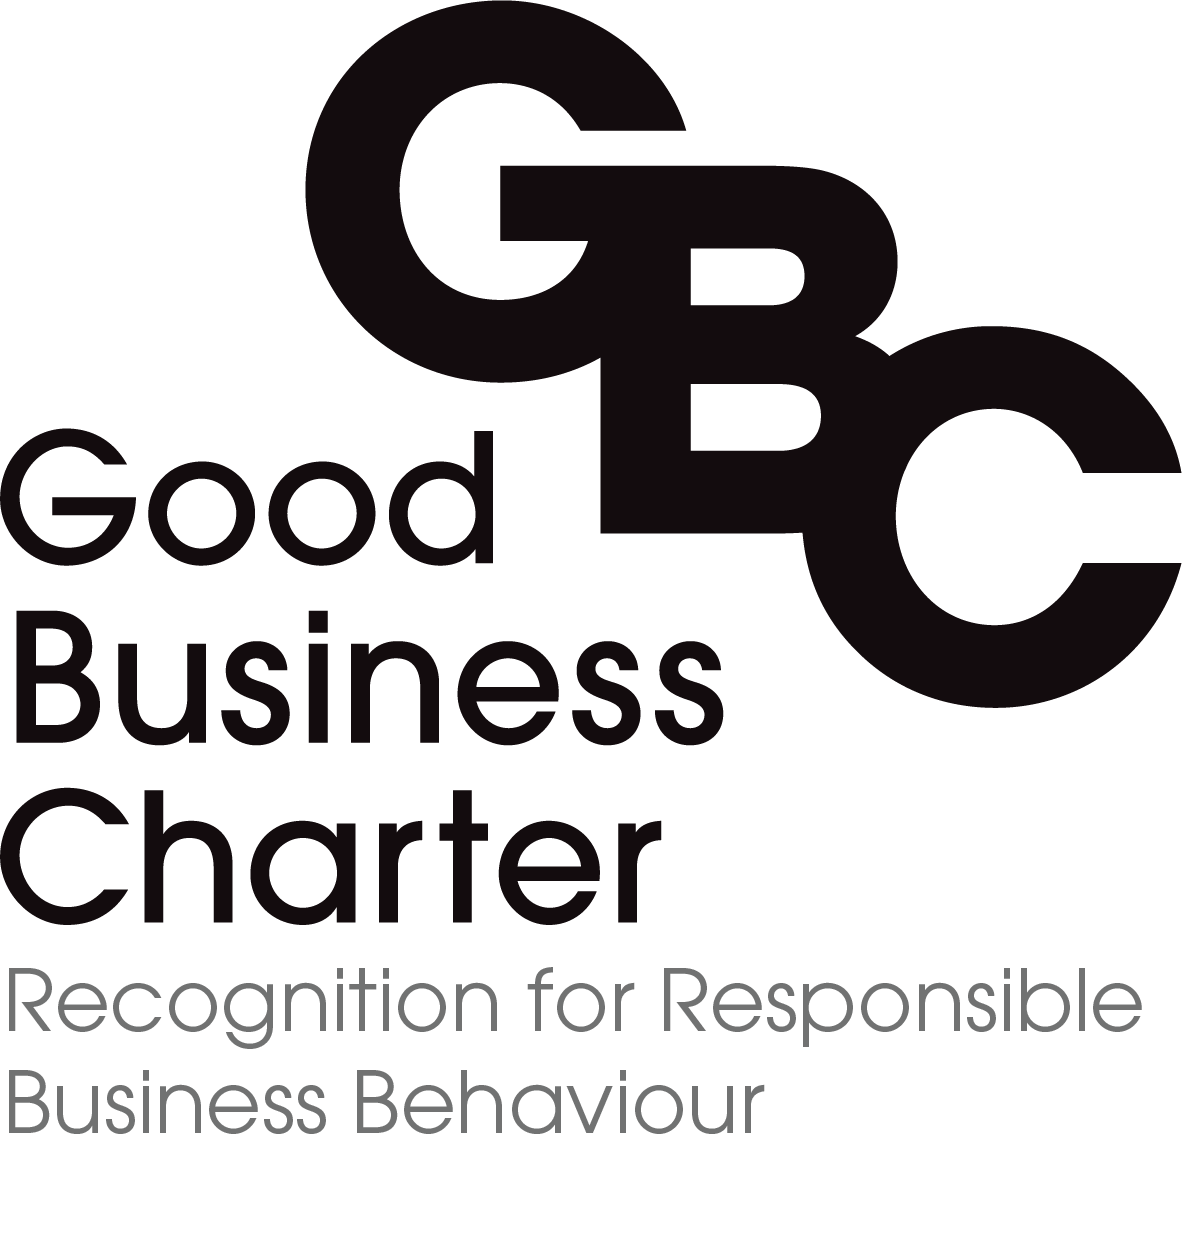 Good Business Charter logo as GBC and charter saying "recognition for responsible business behaviour"